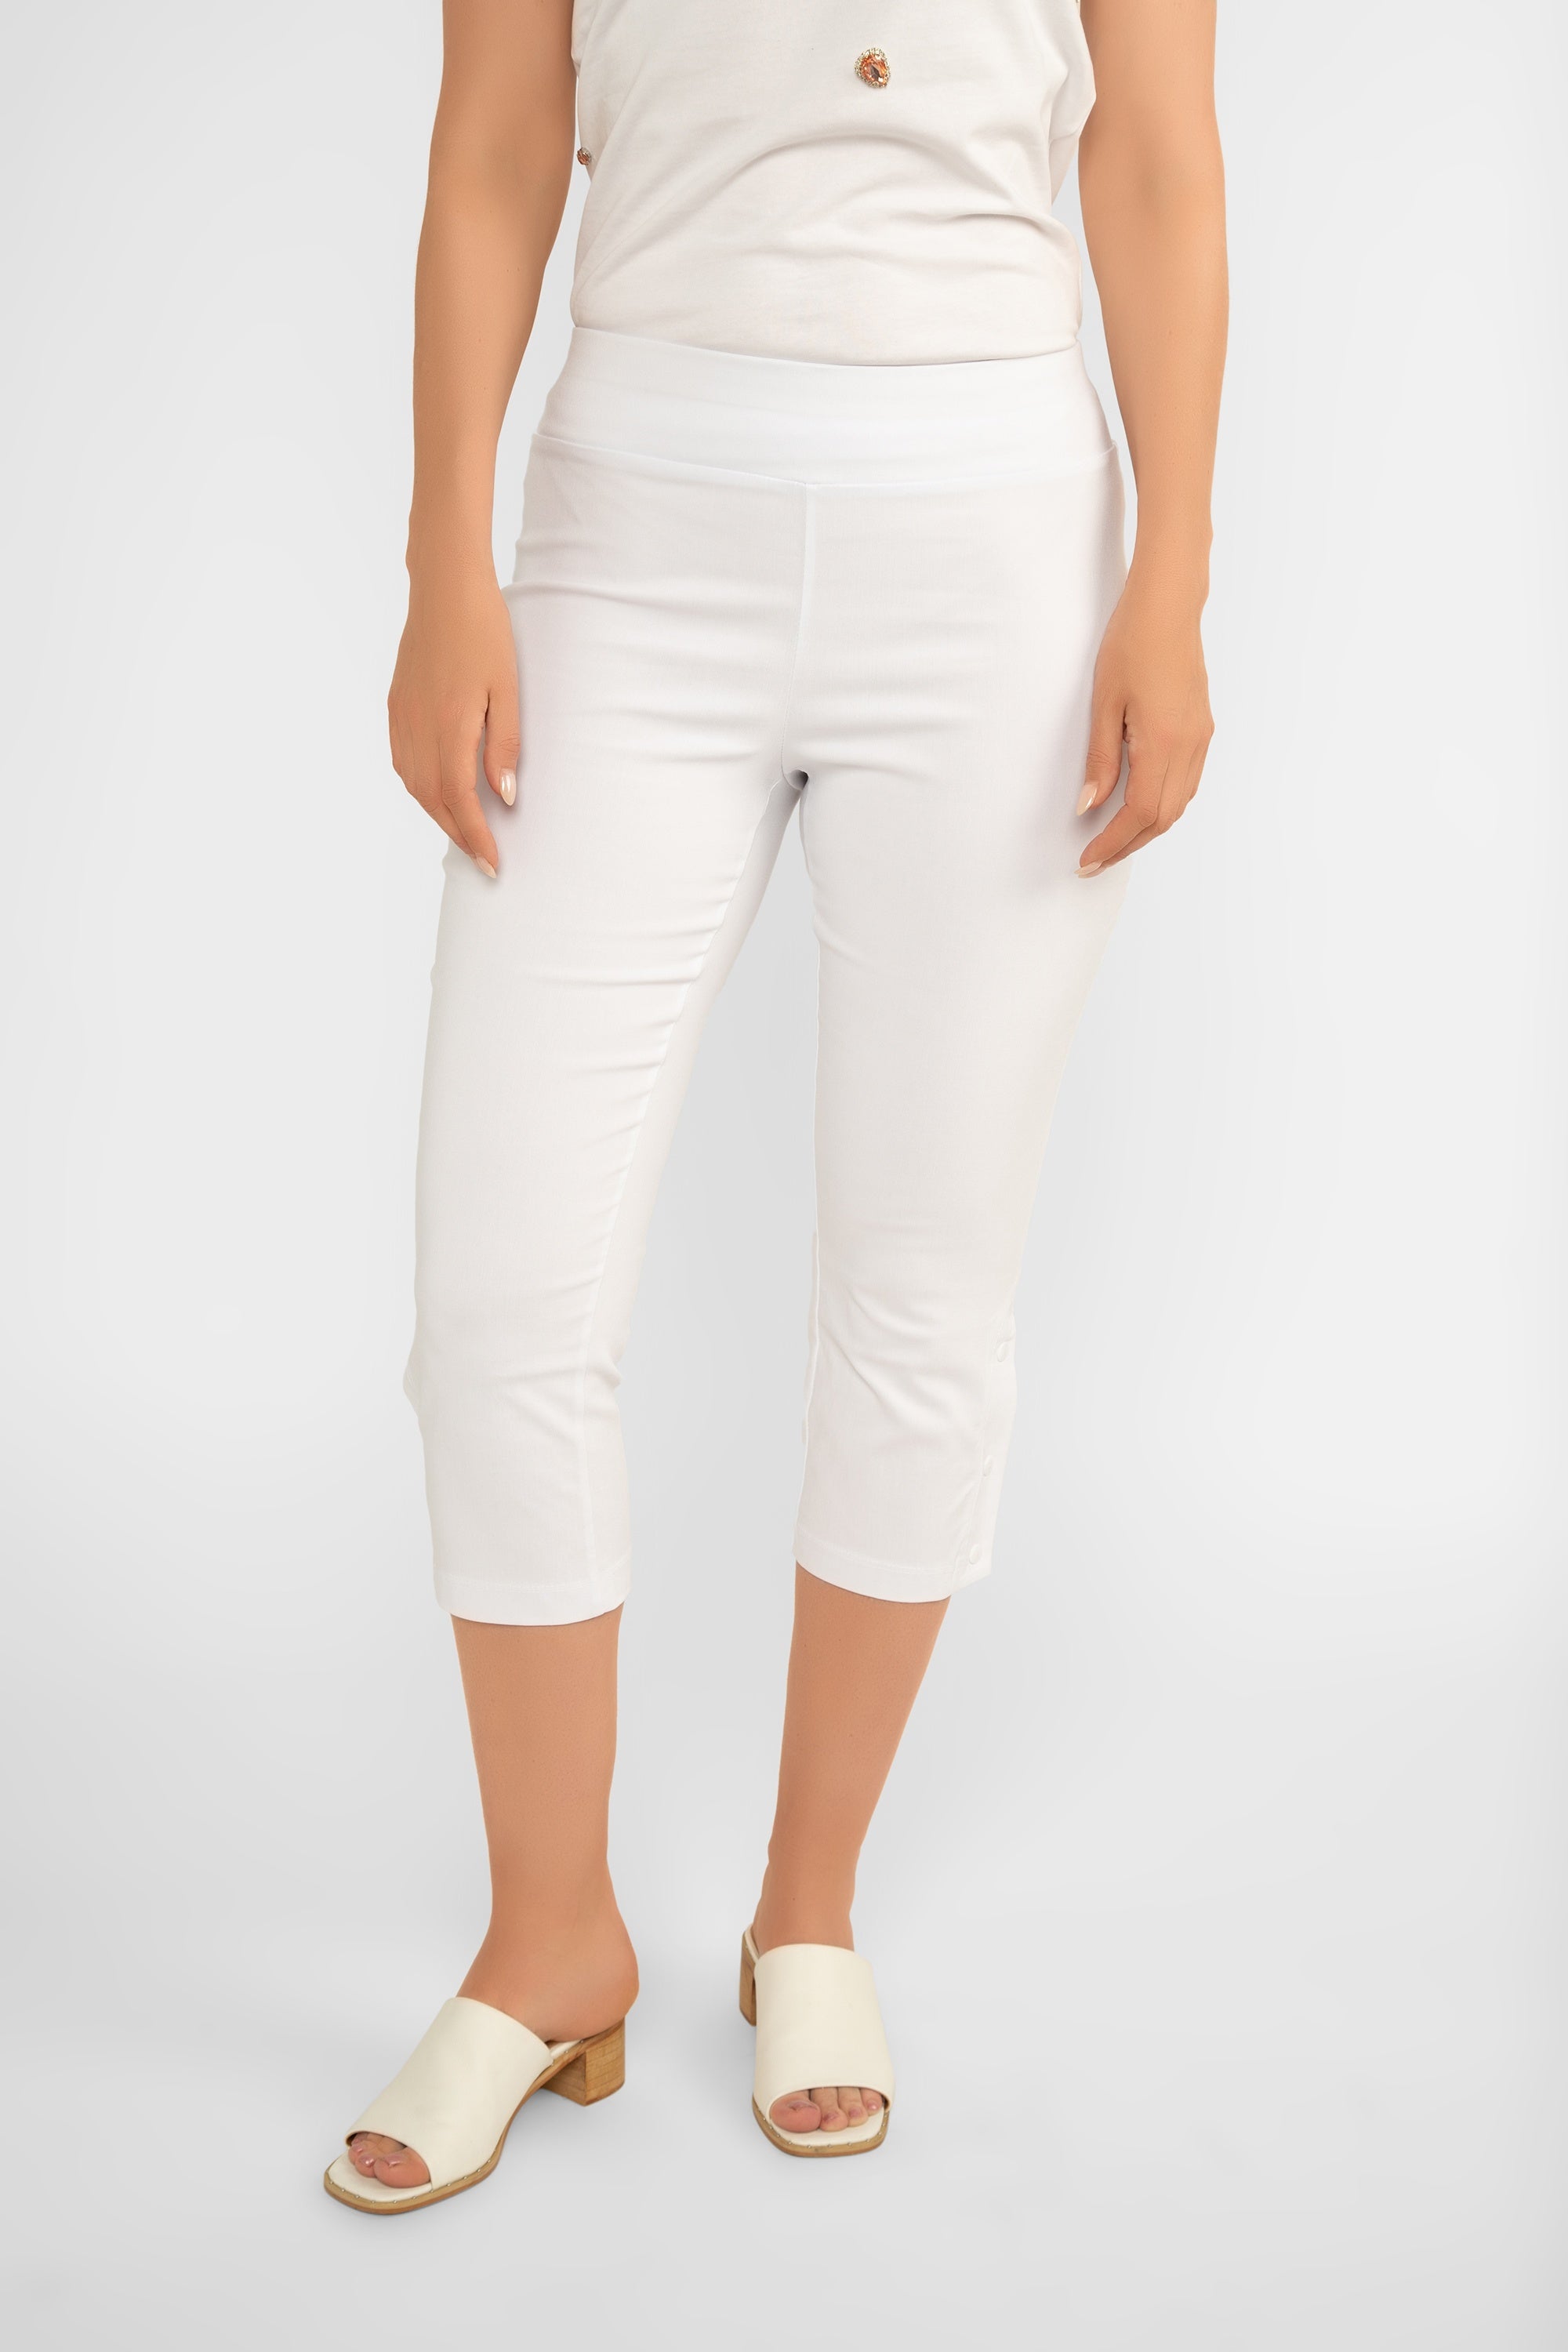 Picadilly (F M959 PR)  Women's Slim Fit Capris with button trim on hem in Capris  BluePicadilly (F M959 PR Women's Slim Fit Capris with button trim on hem in  White